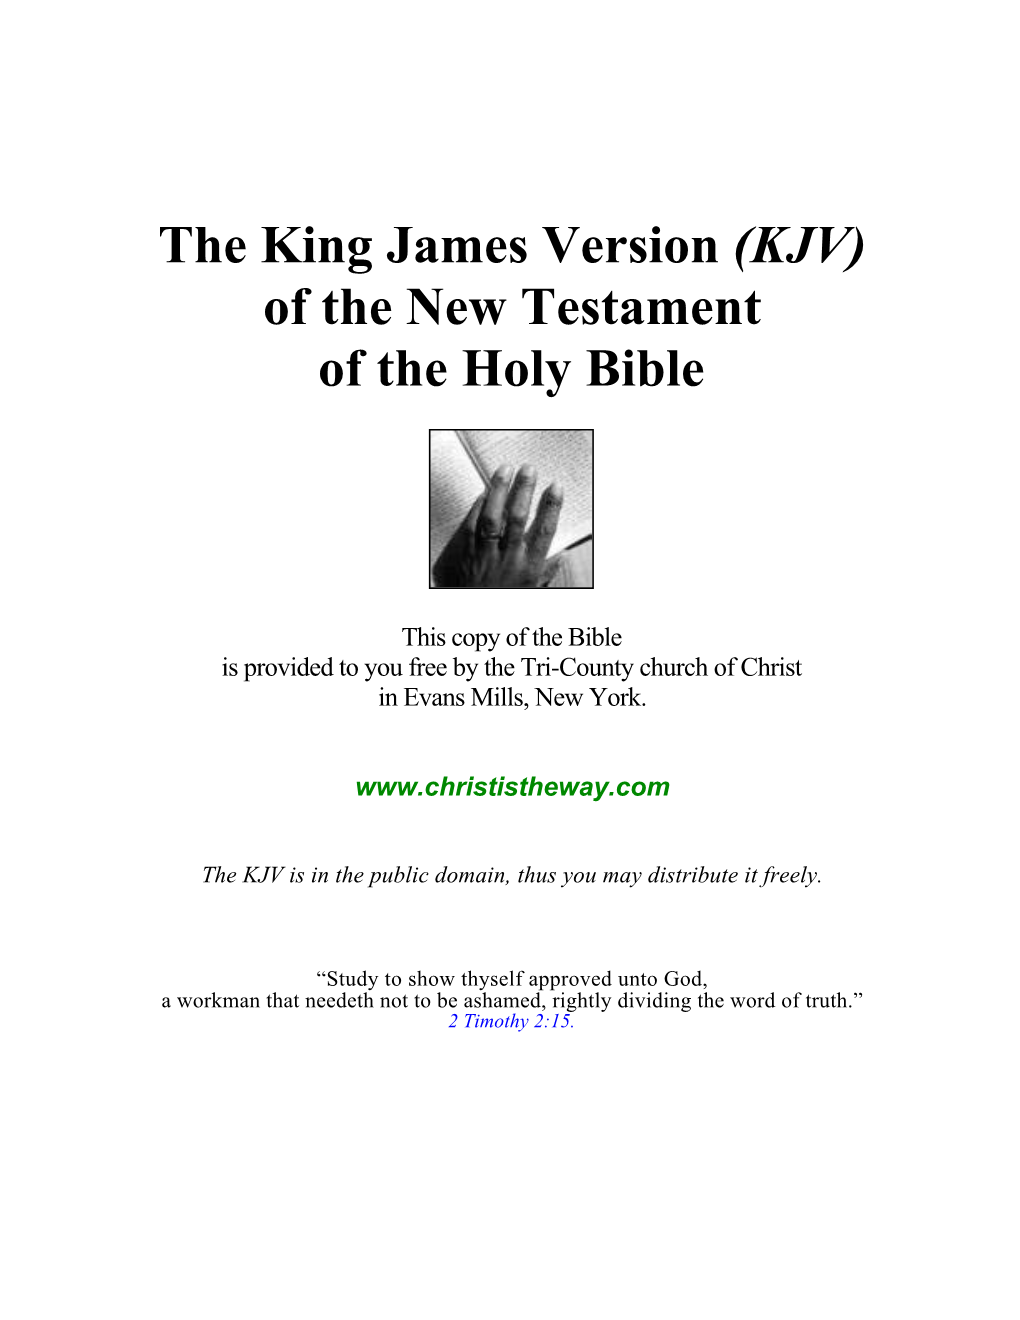 The King James Version (KJV) of the New Testament of the Holy Bible